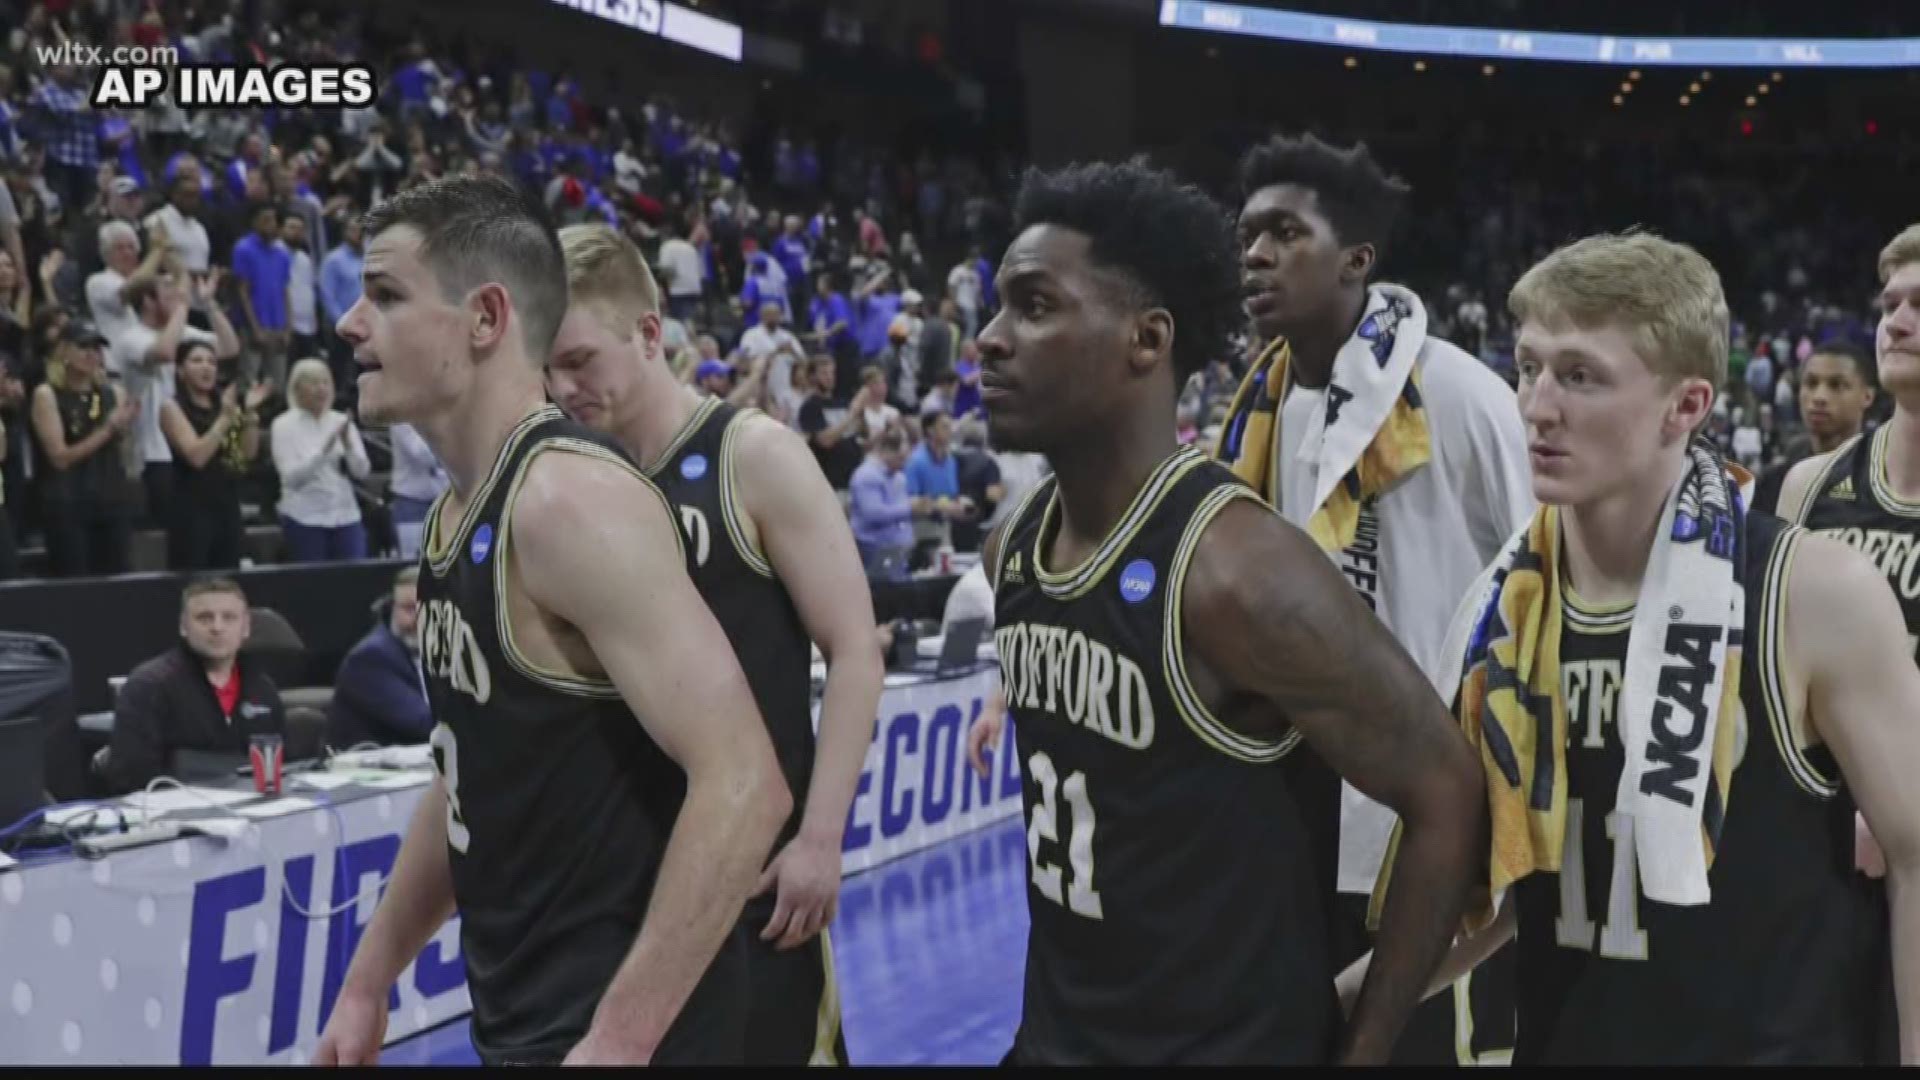 Despite a bad shooting performance from their star player Wofford takes Kentucky to the brink but comes up short in the final minute. Wofford won a record 30 games before bowing out in the second round of the NCAA tournament.